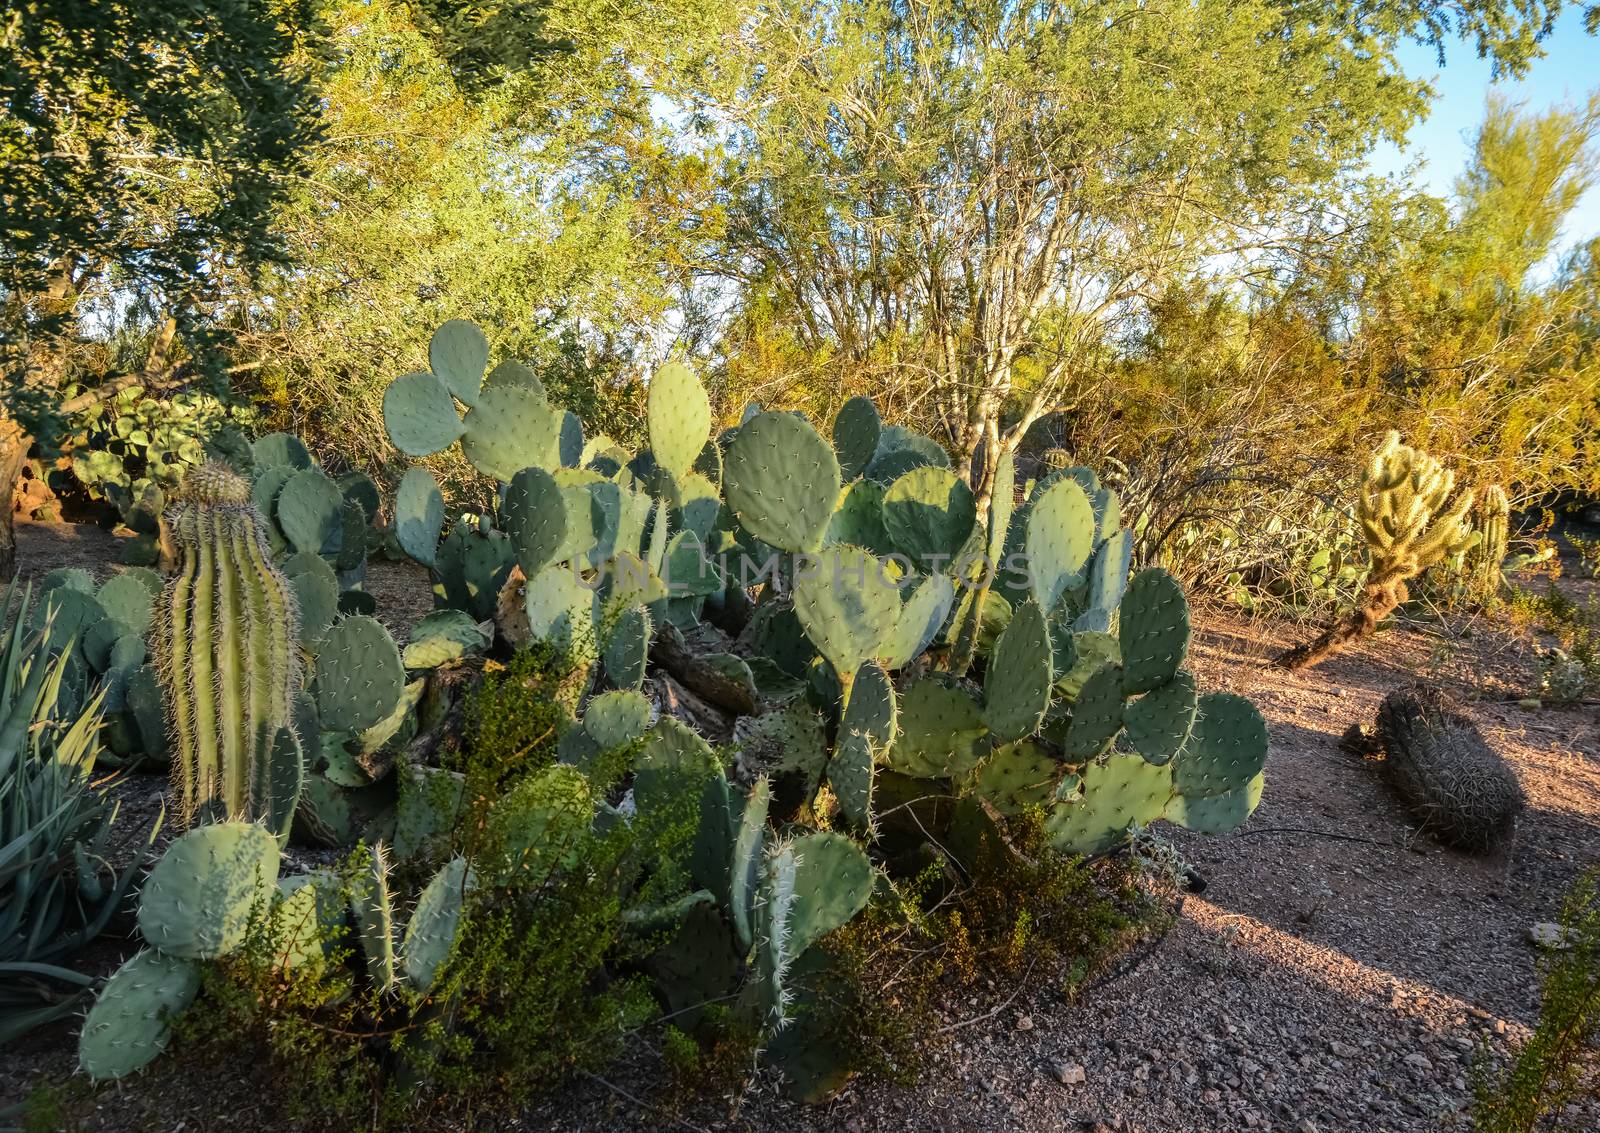 A group of succulent plants of Opuntia cacti in the Phoenix by Hydrobiolog